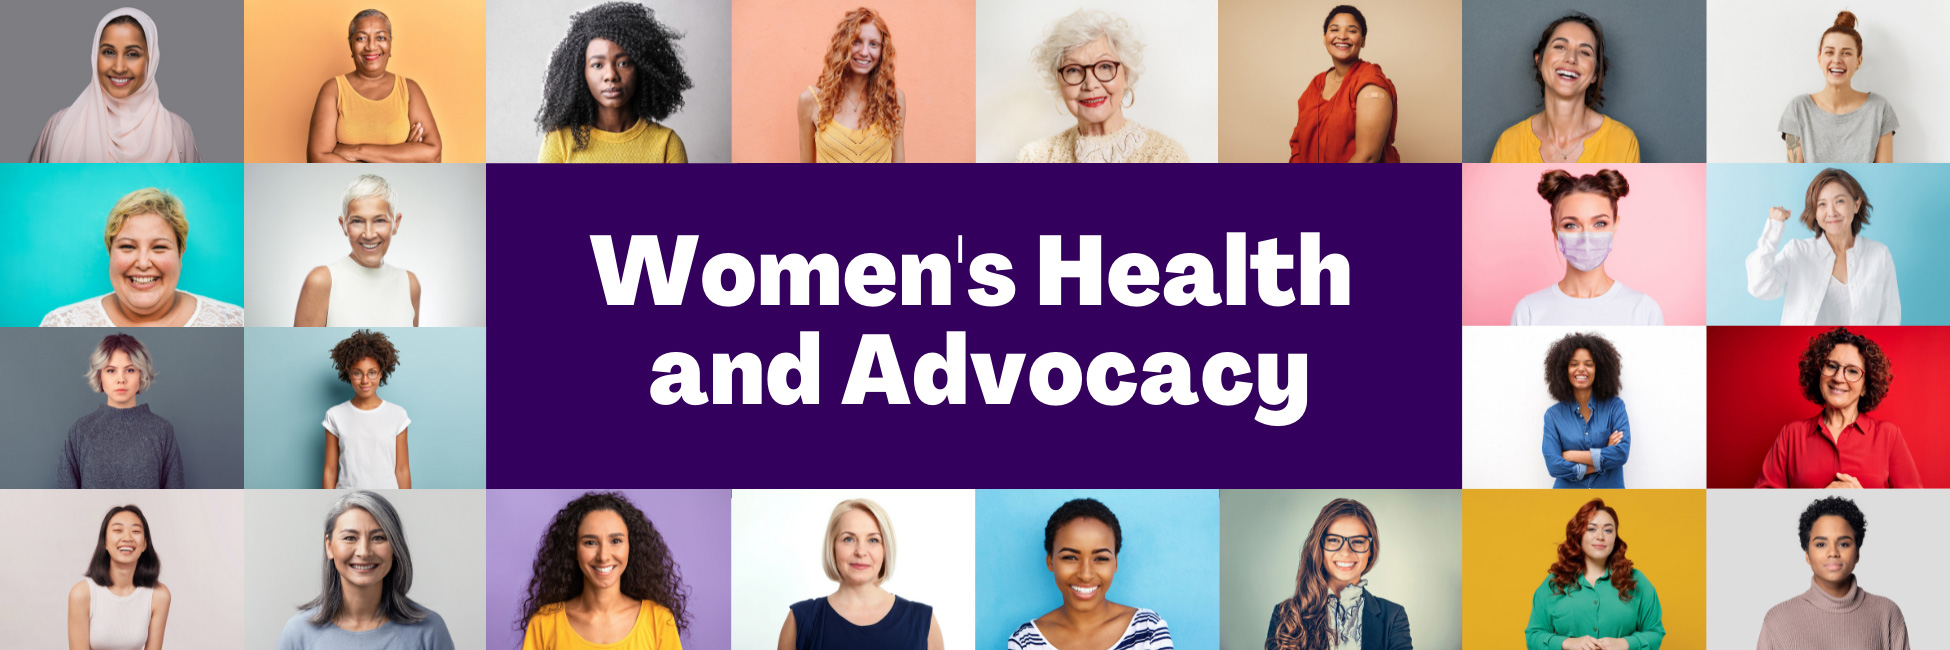 Women's Health and Advocacy